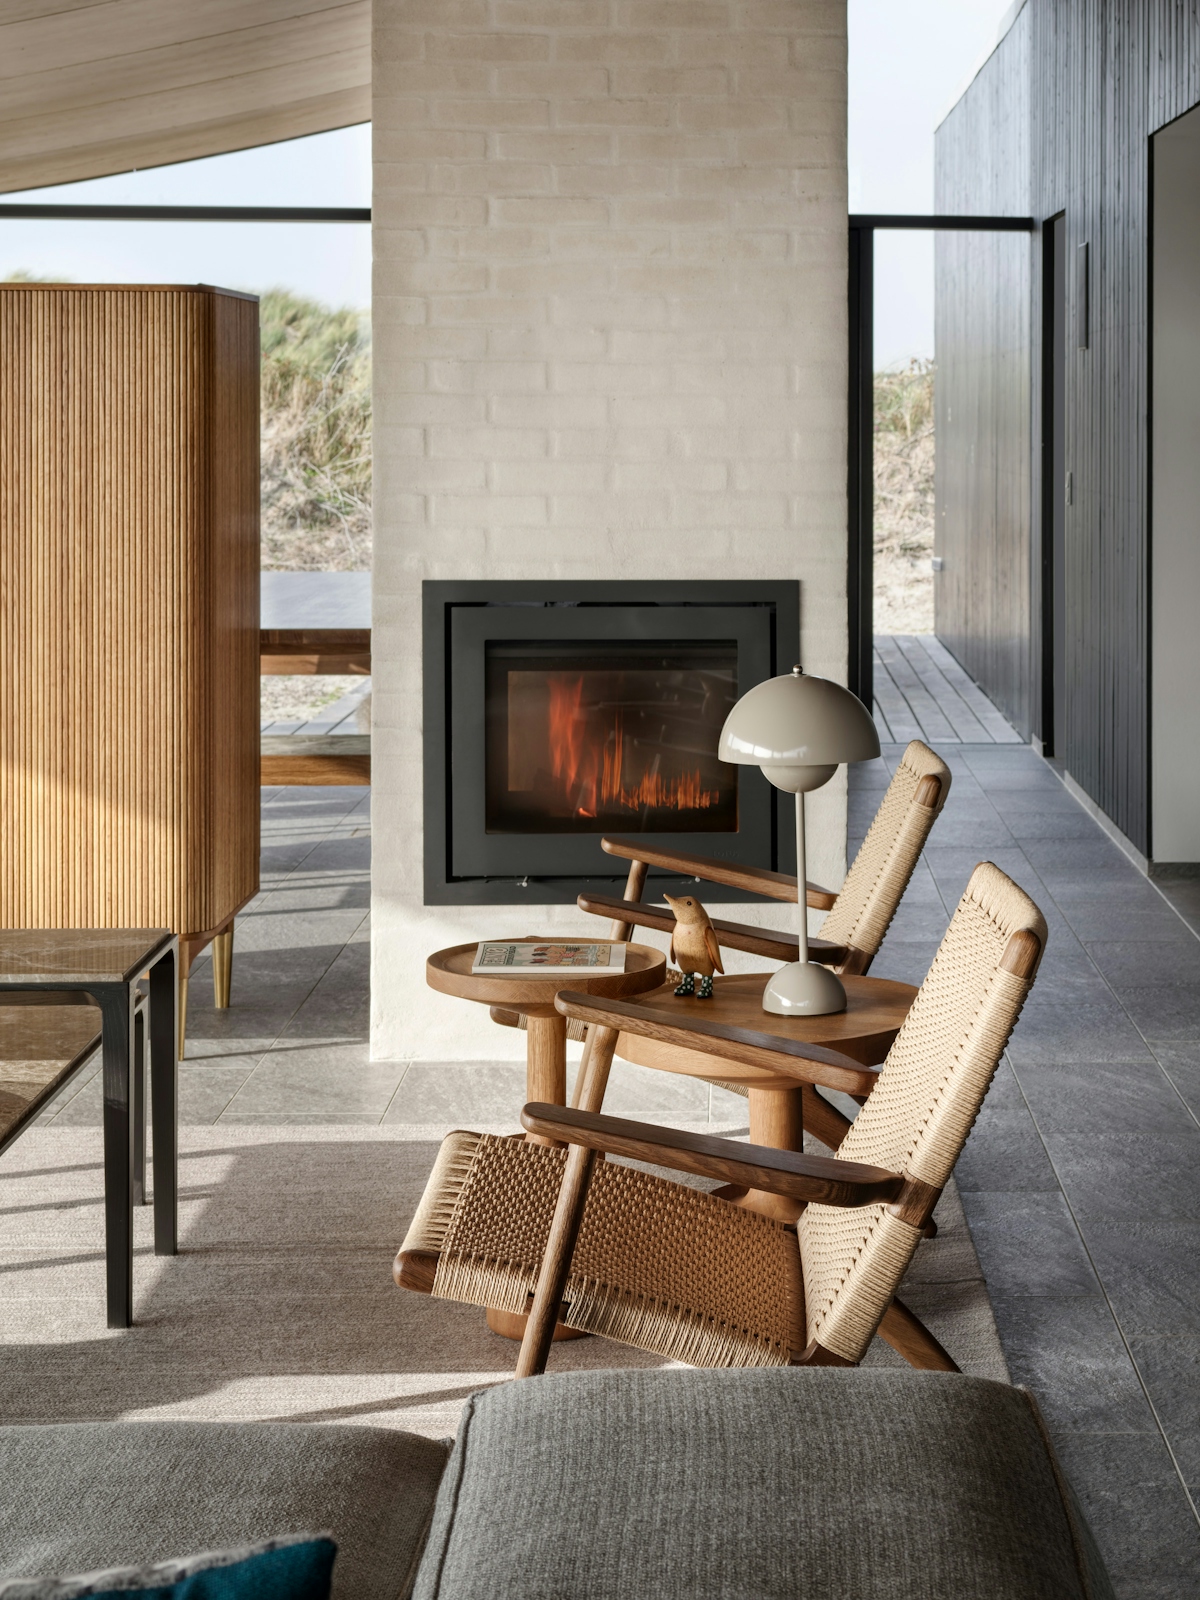 Tollgard studio Danish summer house with fireplace and wooden armchairs